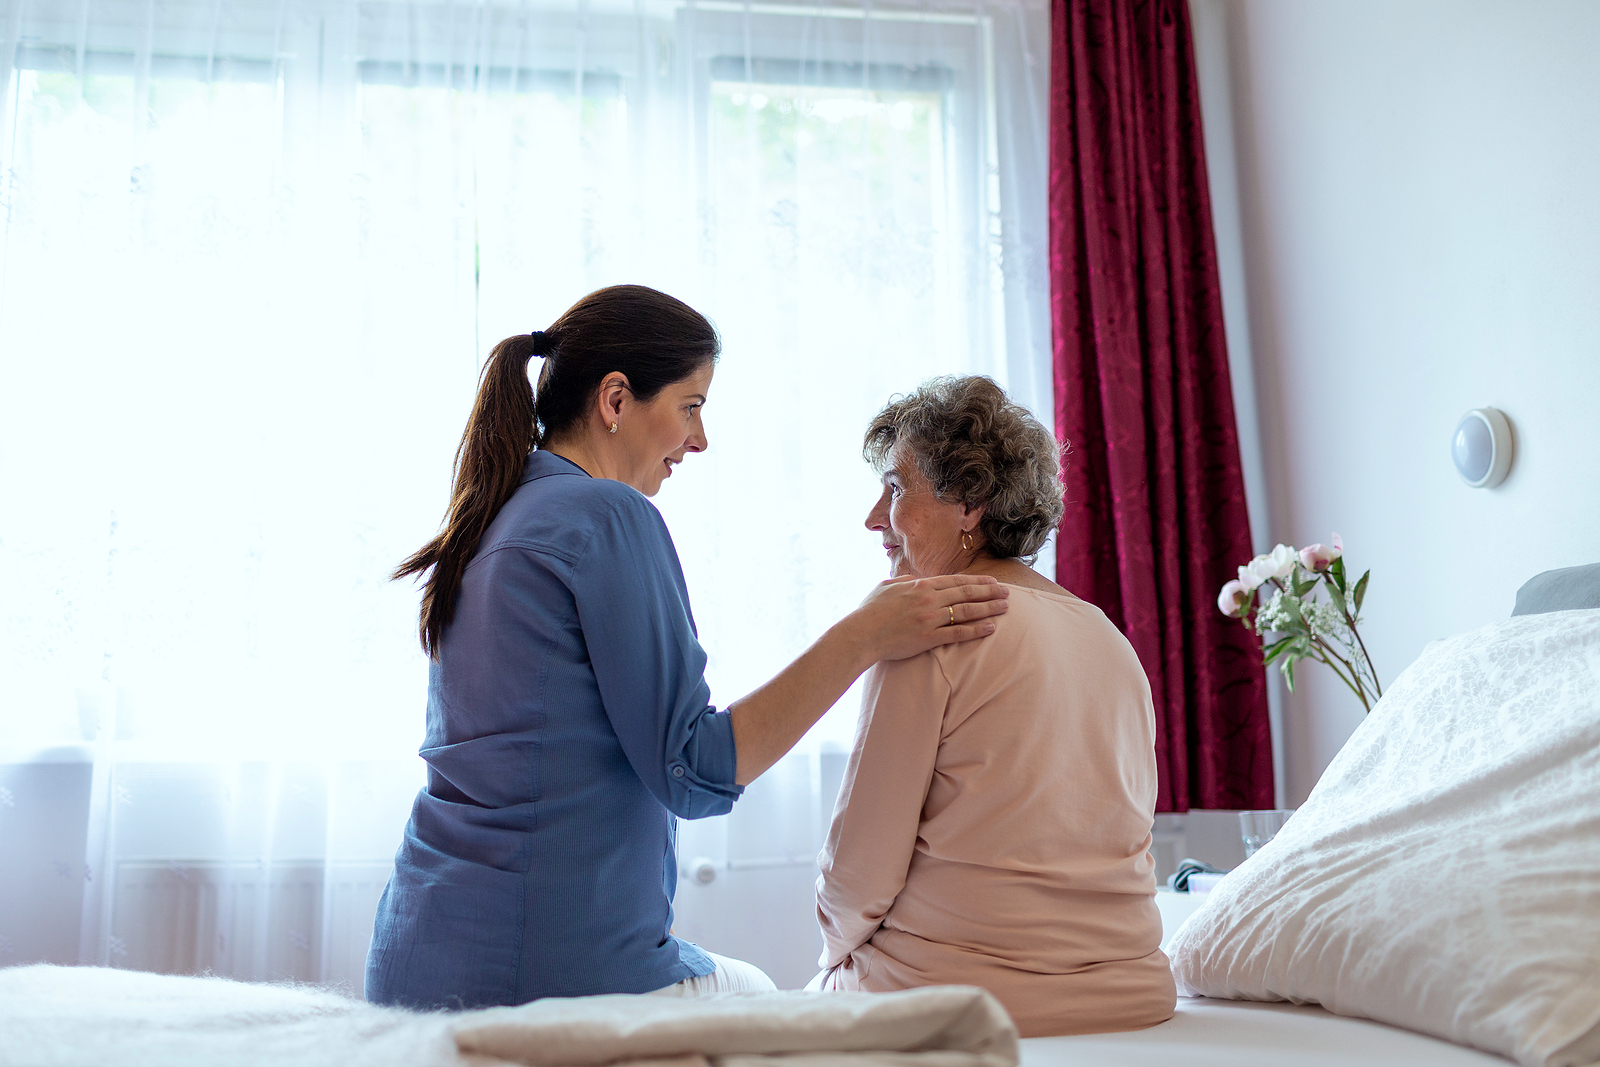 5 Emotional Benefits of Companion Care at Home